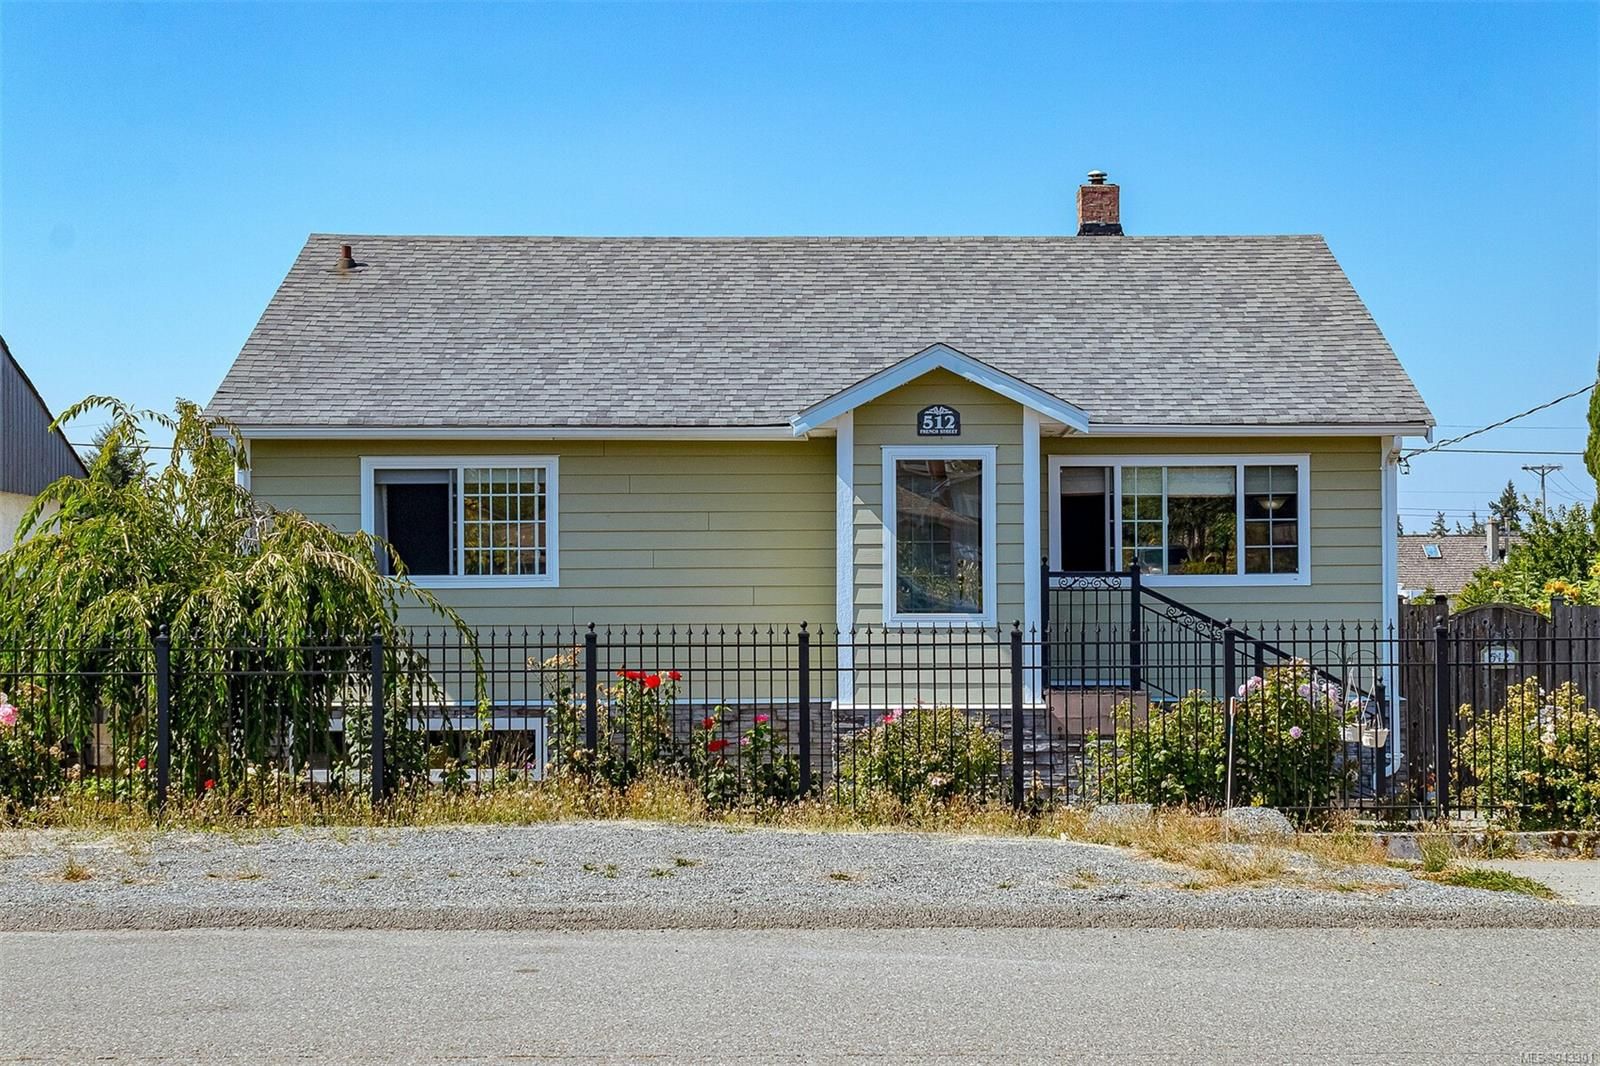 New property listed in Du Ladysmith, Duncan